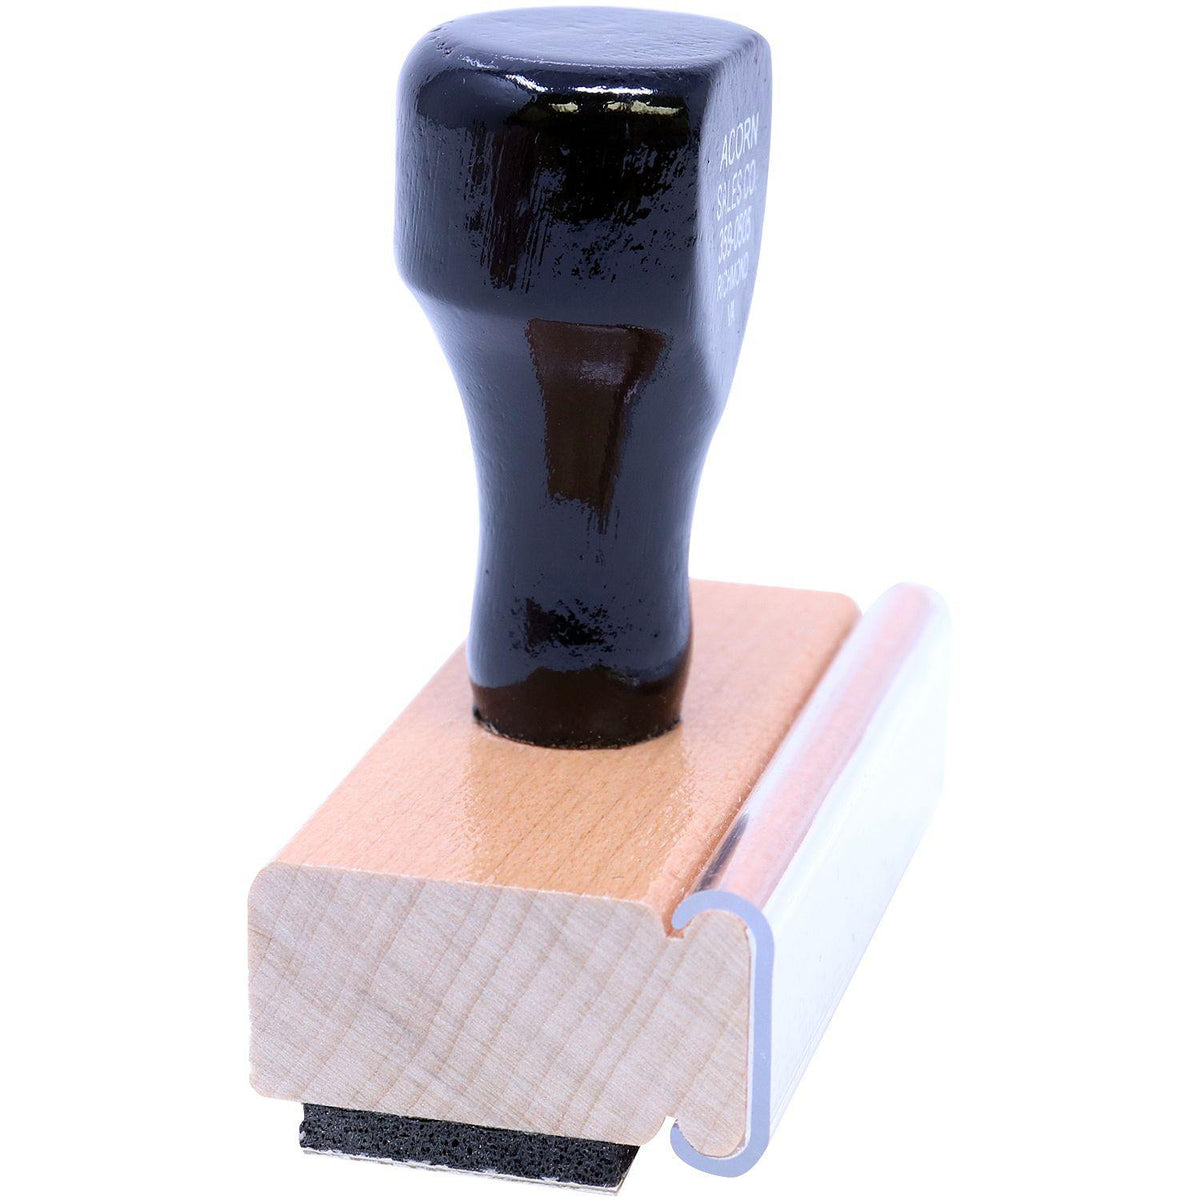 Side View of Large Express Mail International Rubber Stamp at an Angle